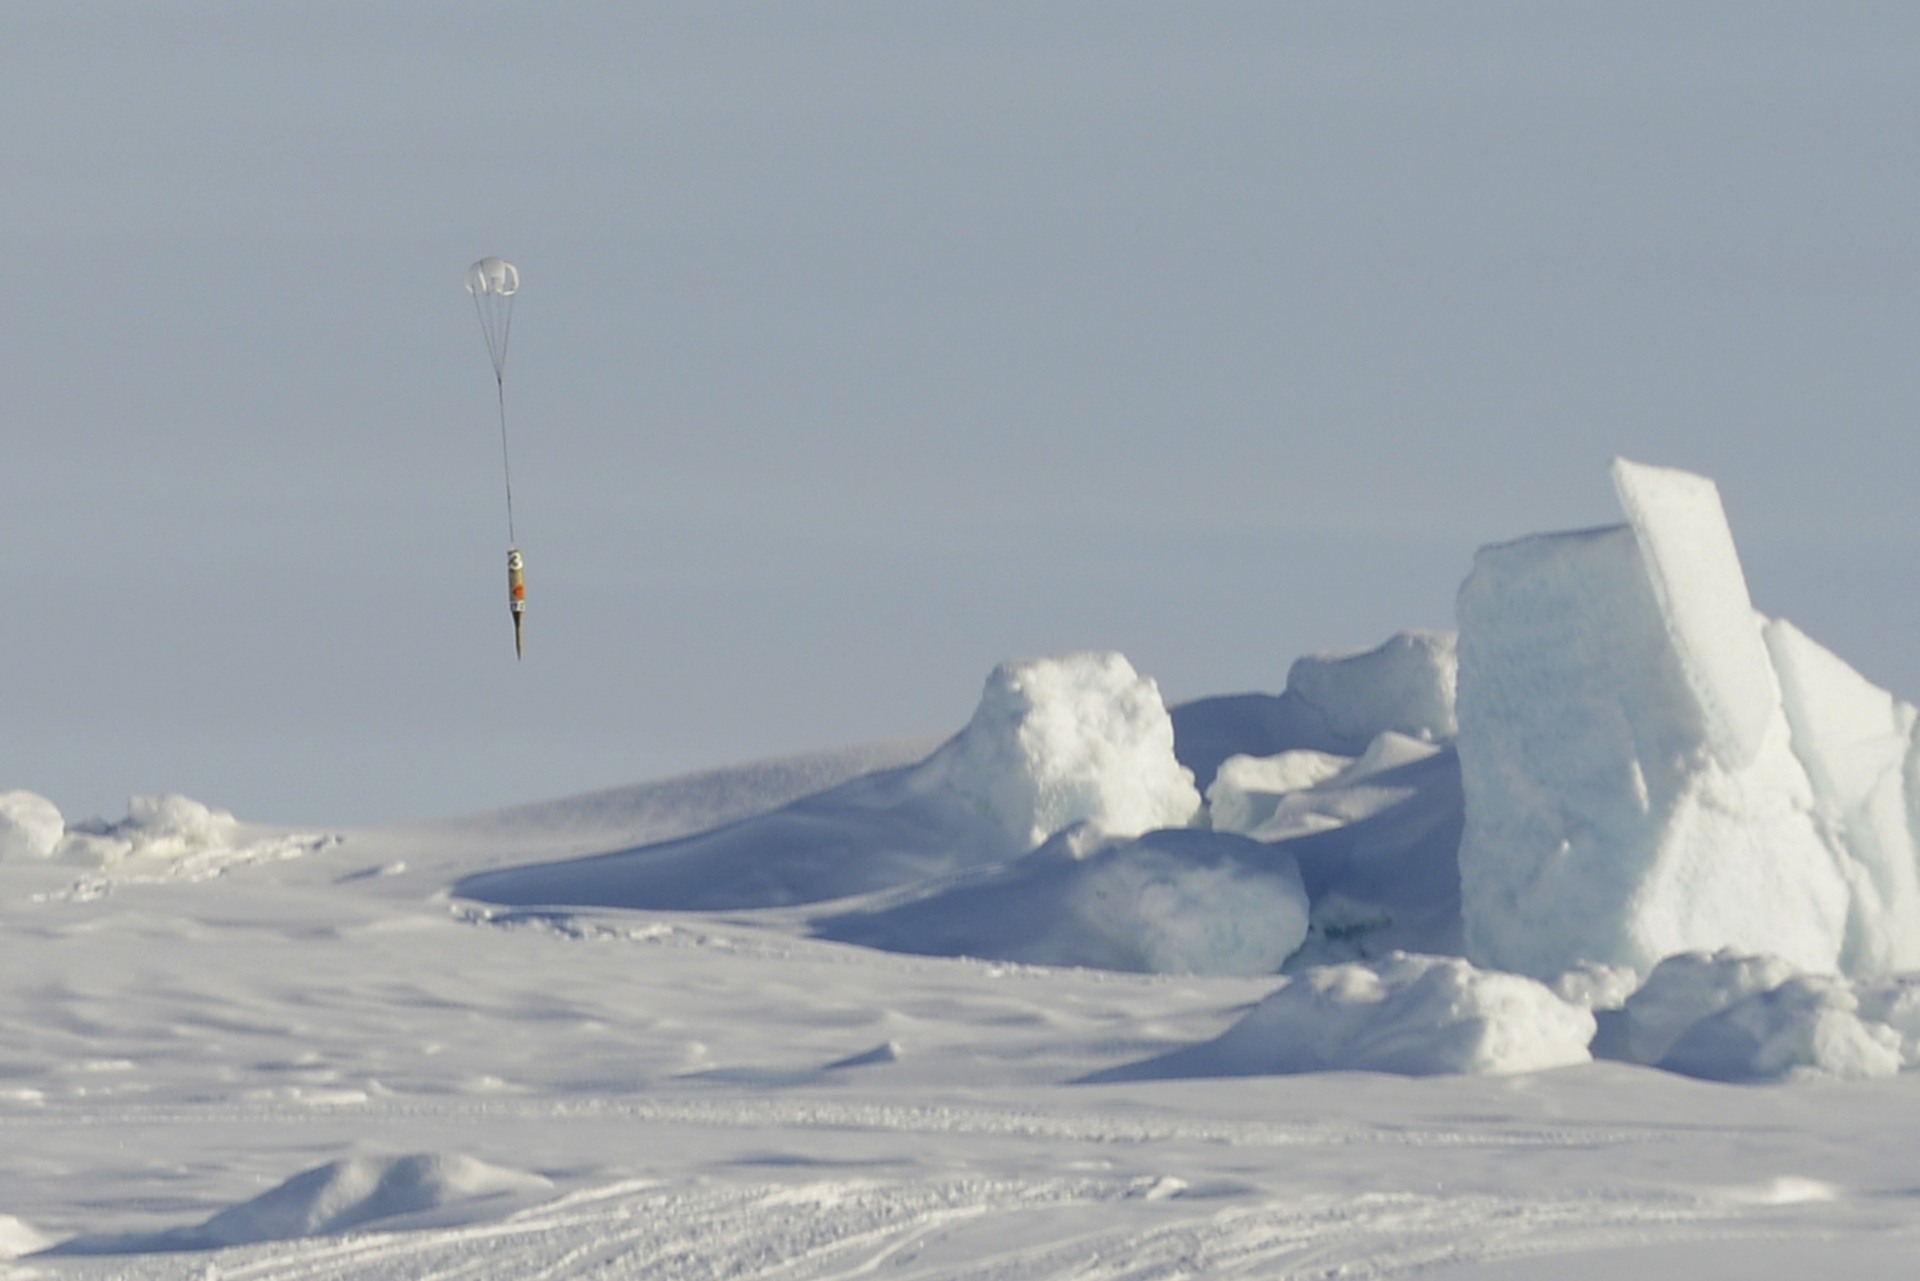 An icepick geobuoy is released and opens its drag chute.
Photo by Janice Lang, DRDC